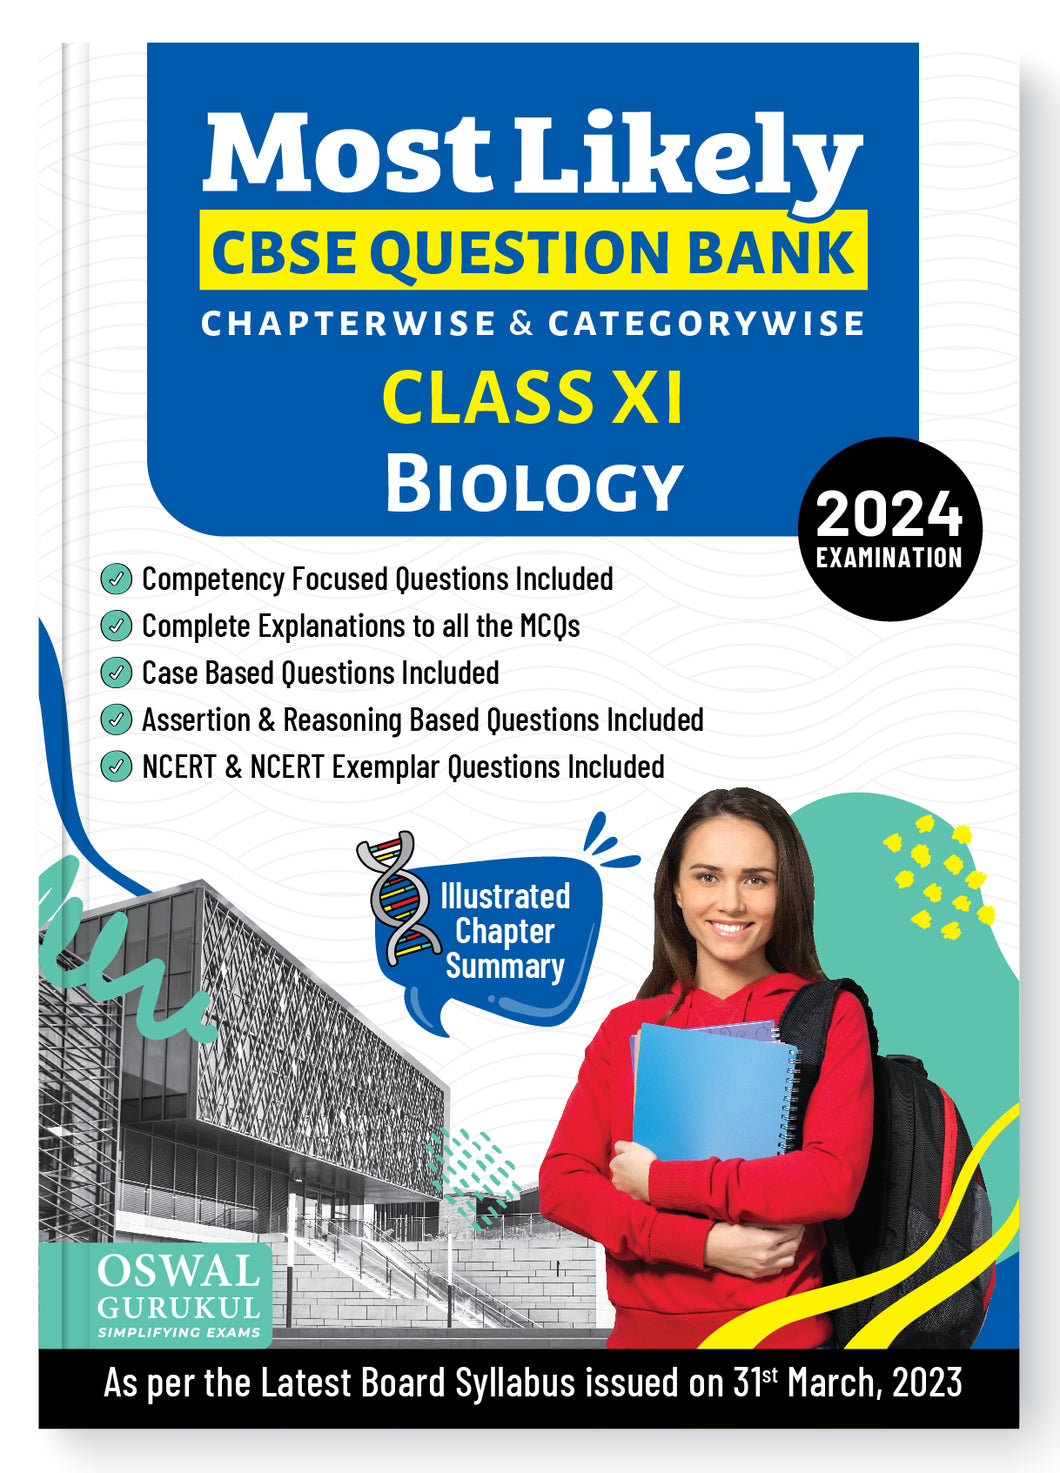 Oswal - Gurukul Biology Most Likely CBSE Question Bank : Class 11 Exam 2024